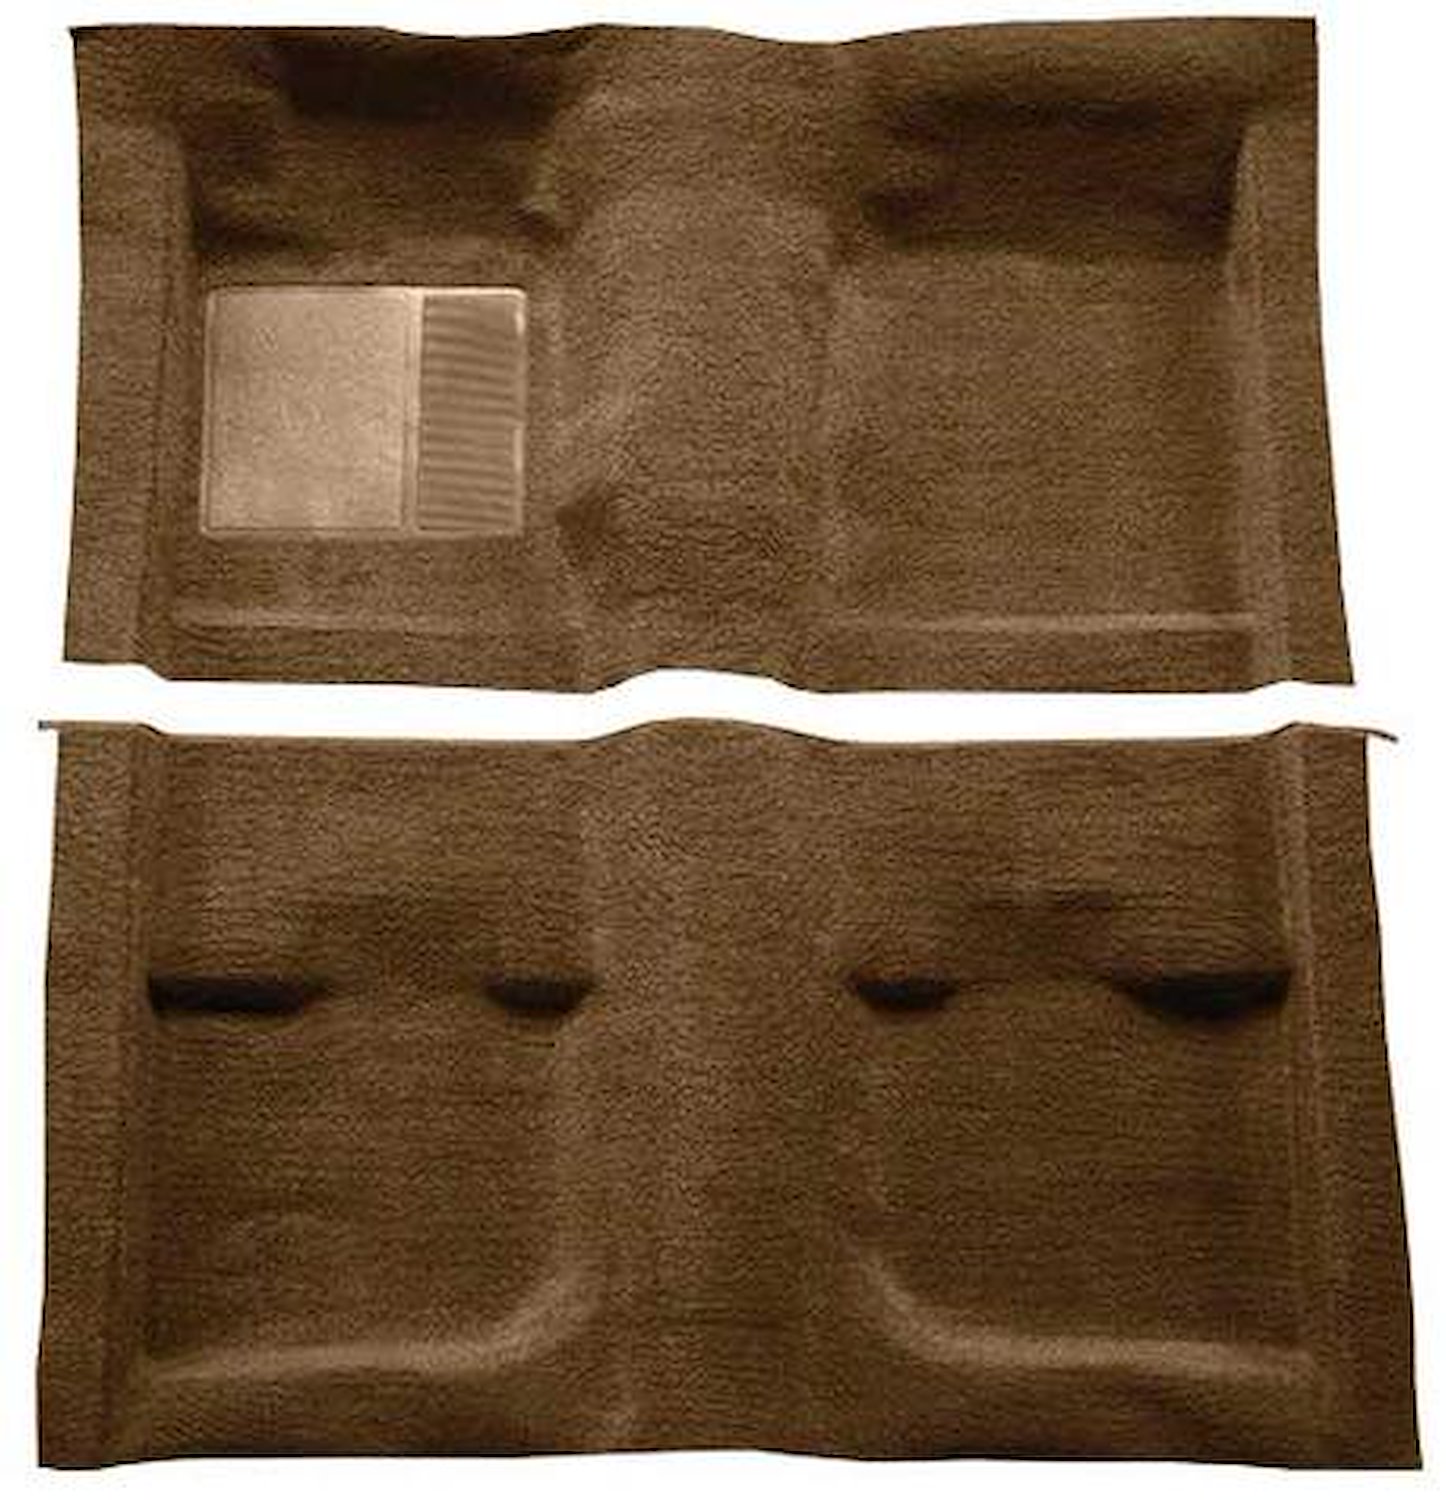 A4057A29 Passenger Area Nylon Loop Floor Carpet 1971-73 Mustang Coupe/Fastback; Ginger